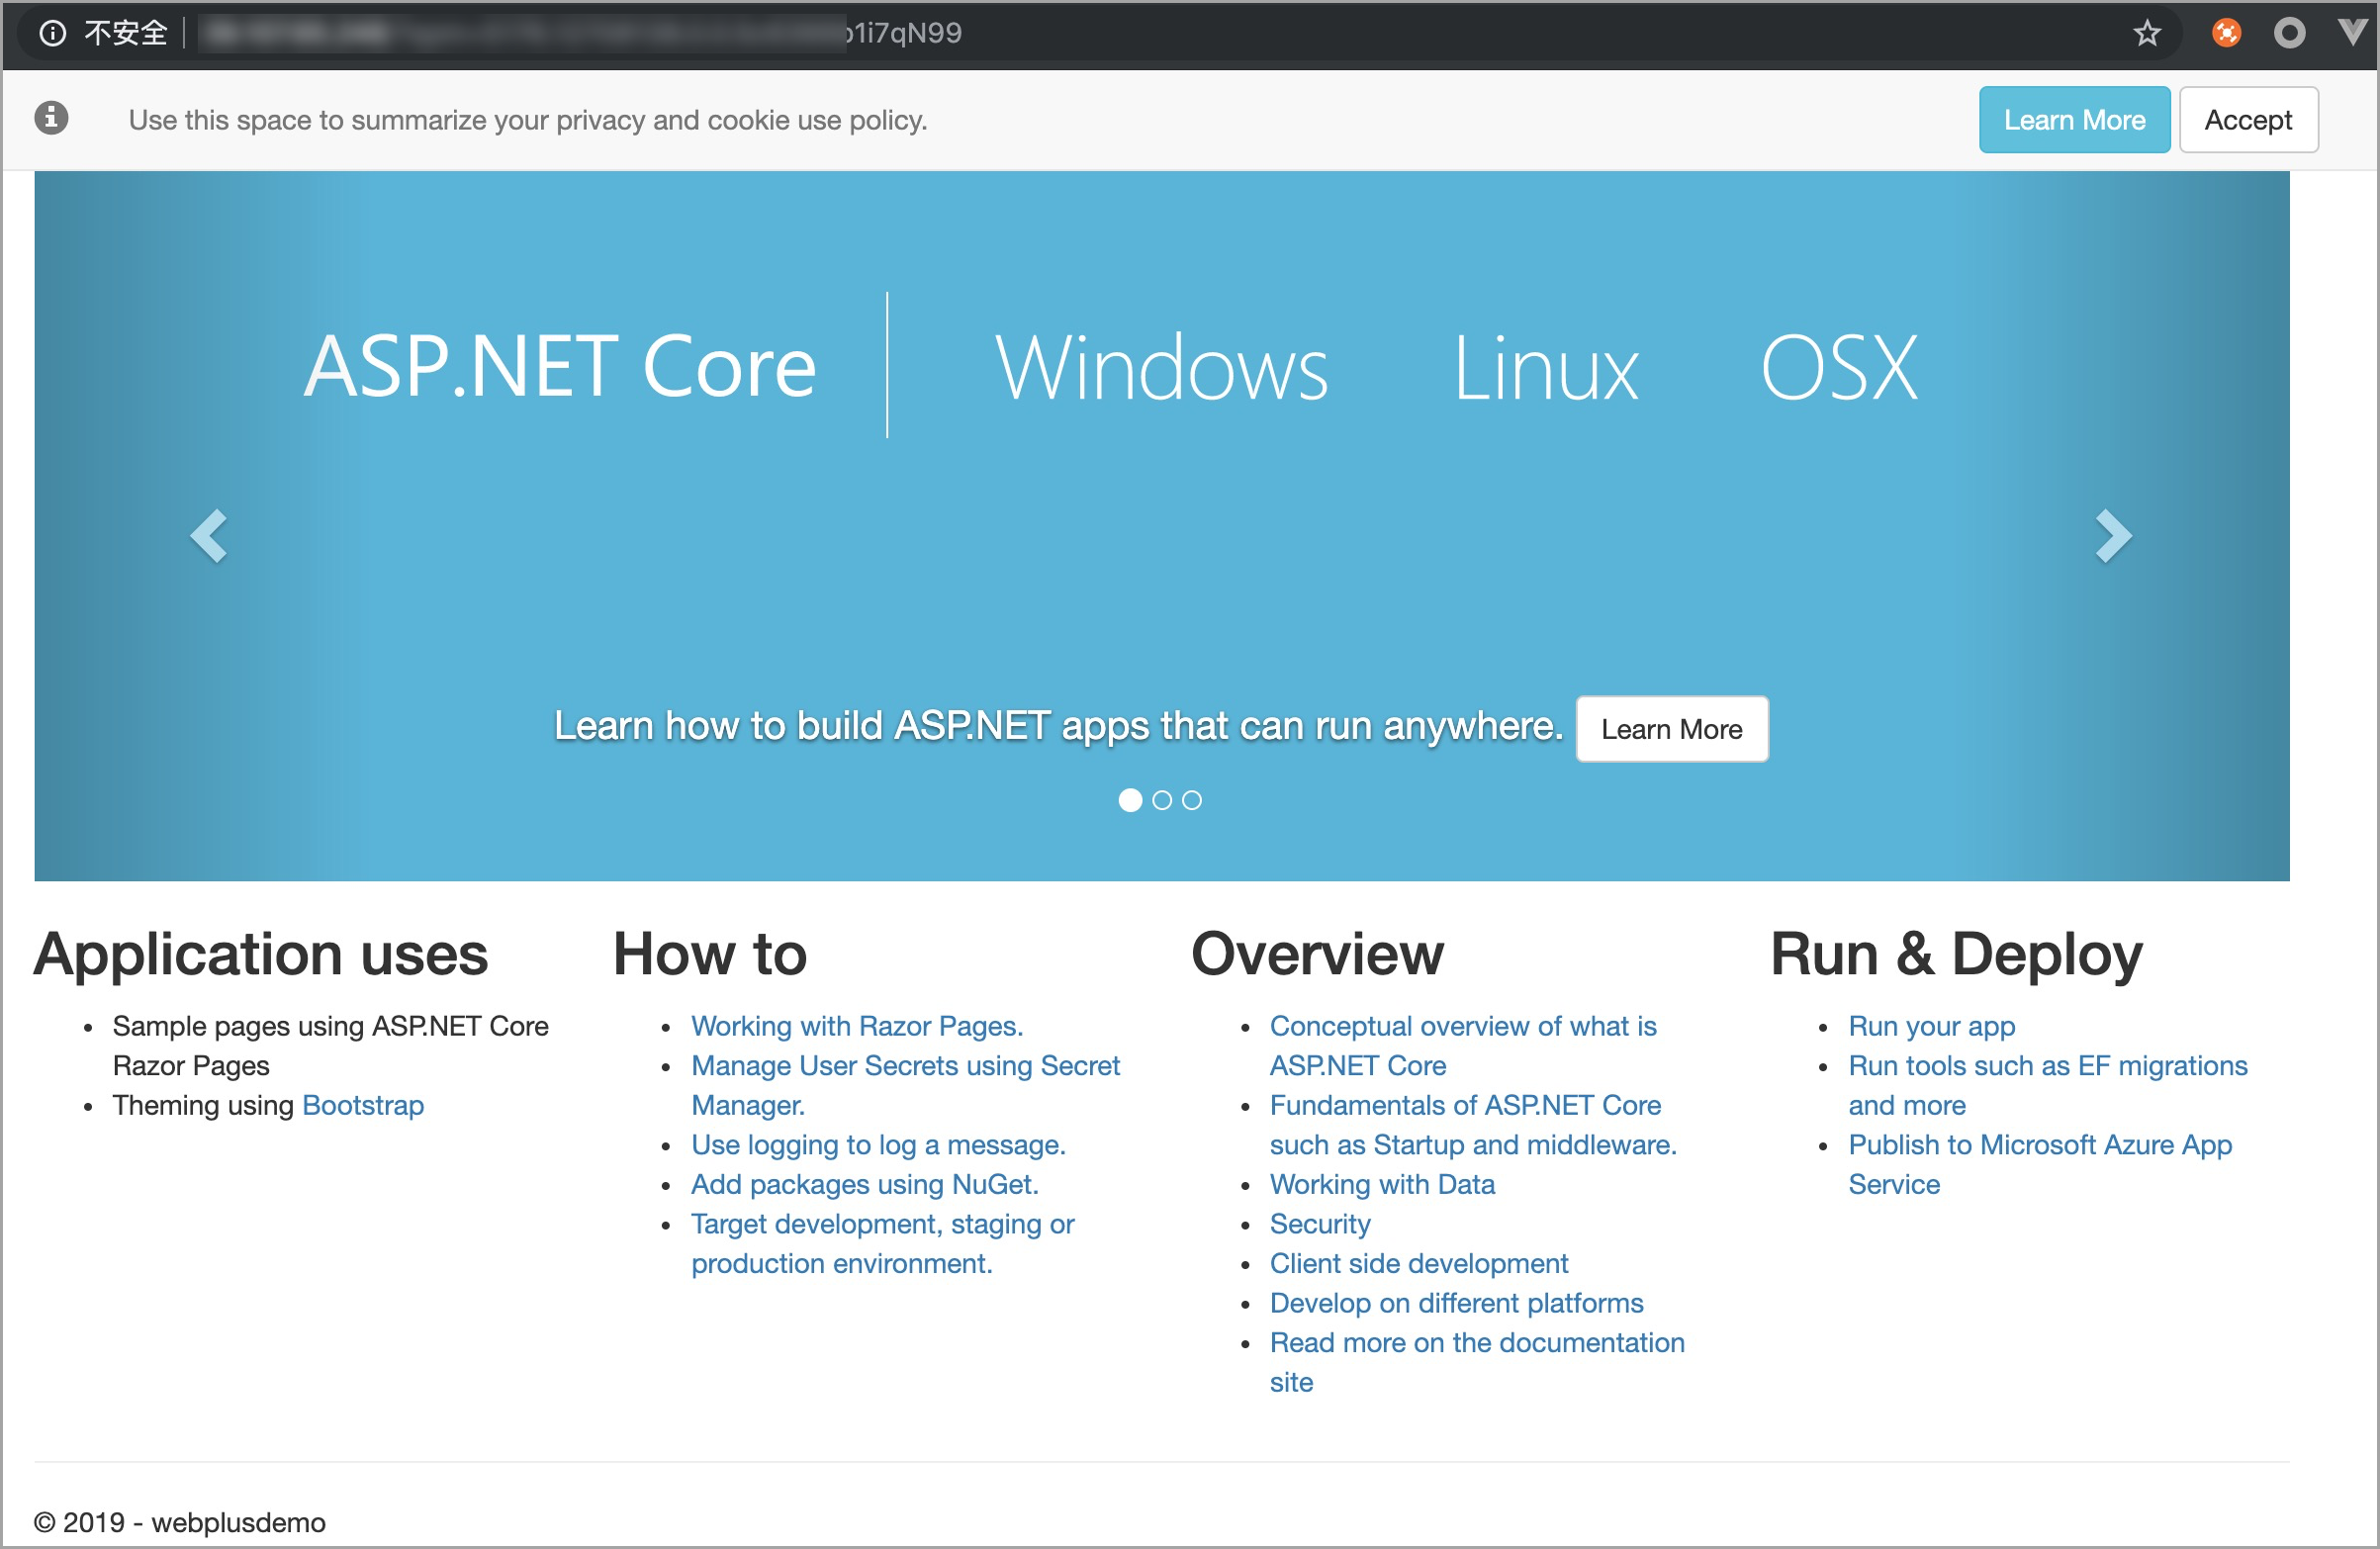 Visit the homepage of a .NET Core application